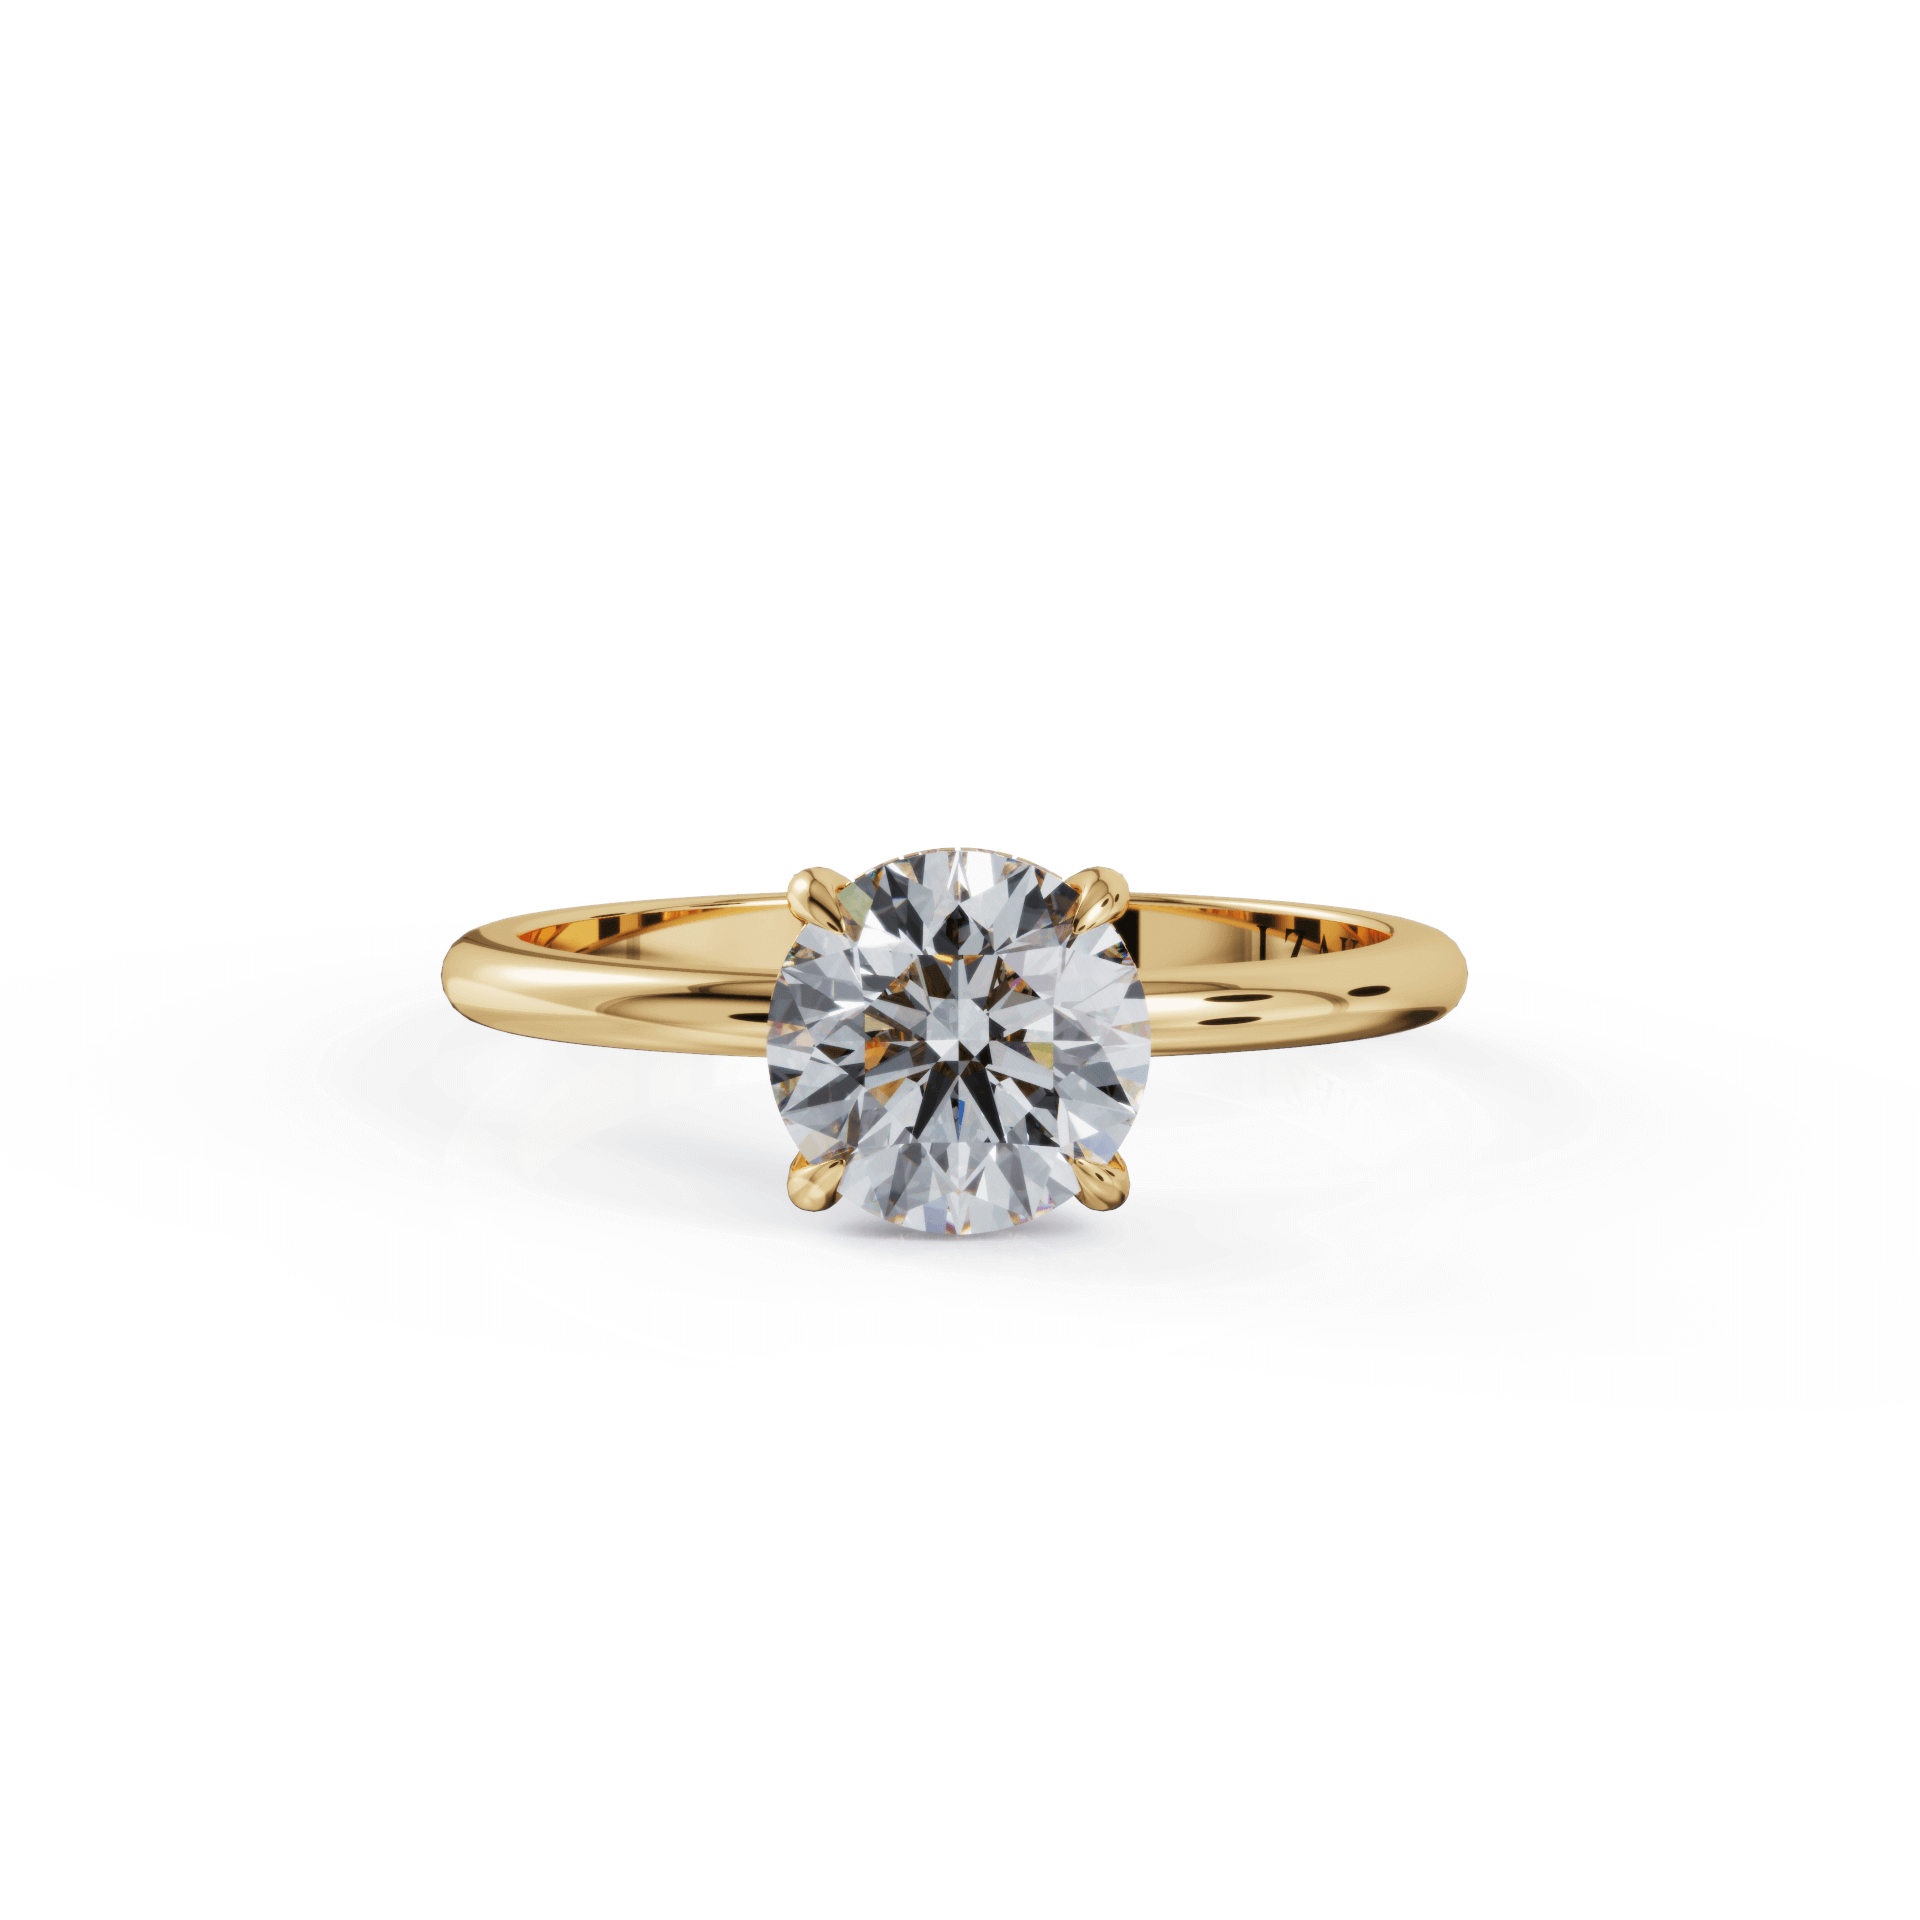 Hidden Halo Solitaire Diamond Engagement Ring 14K Yellow Gold Rings by VDBRC | Izakov